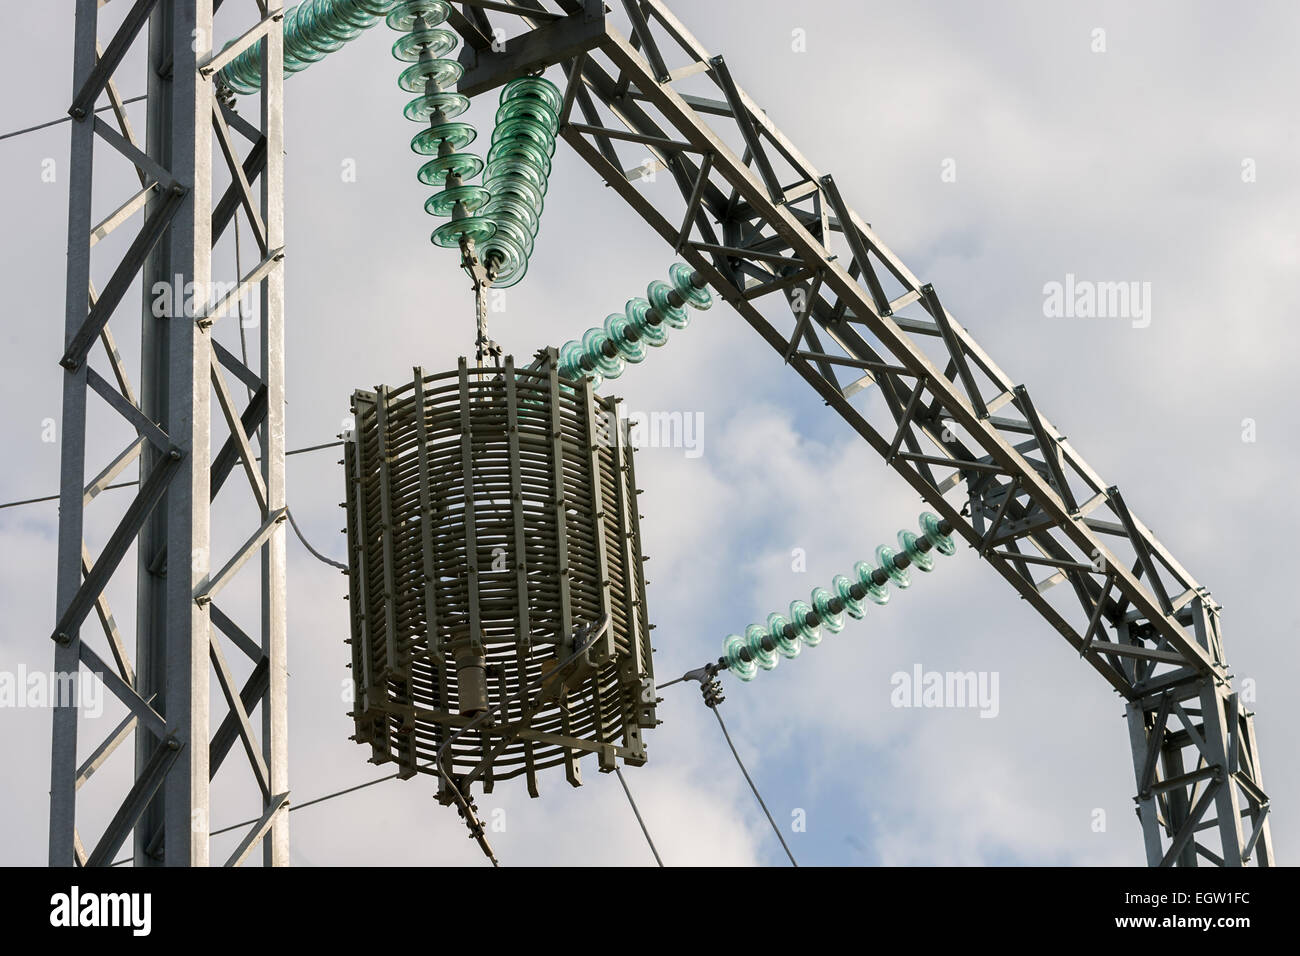 a high voltage power pylons against blue sky Stock Photo